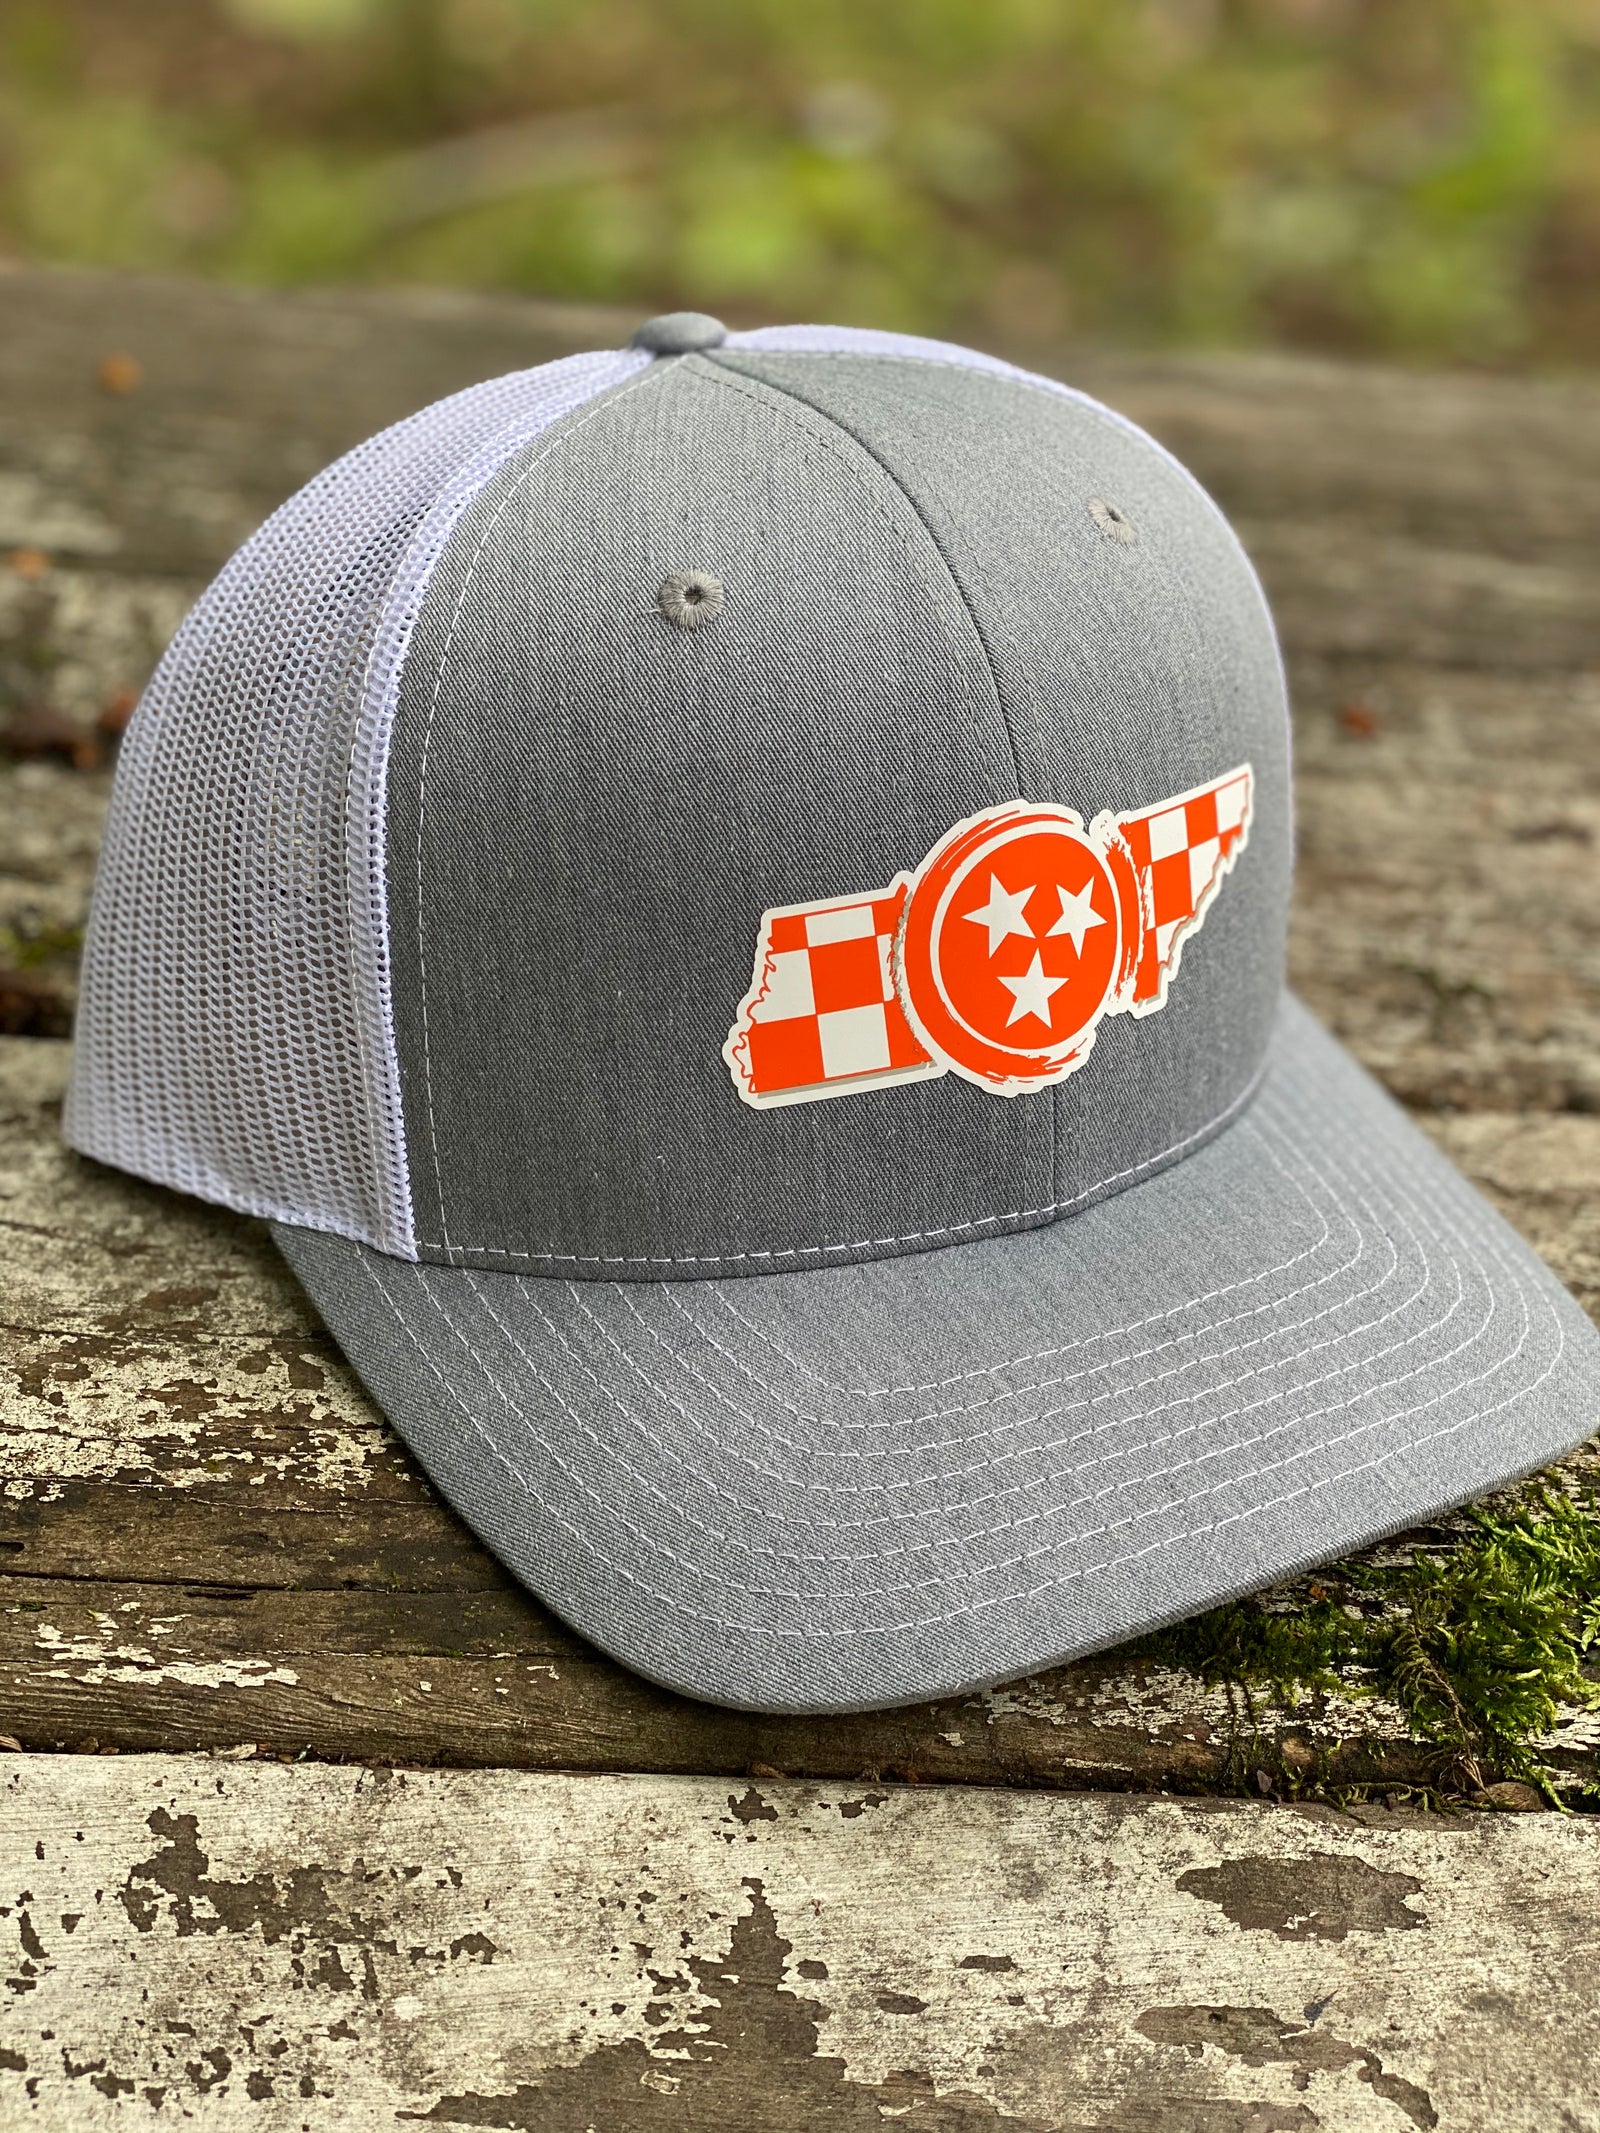 Tennessee Tristar Hats by Volunteer Traditions White w/ Orange Tristar